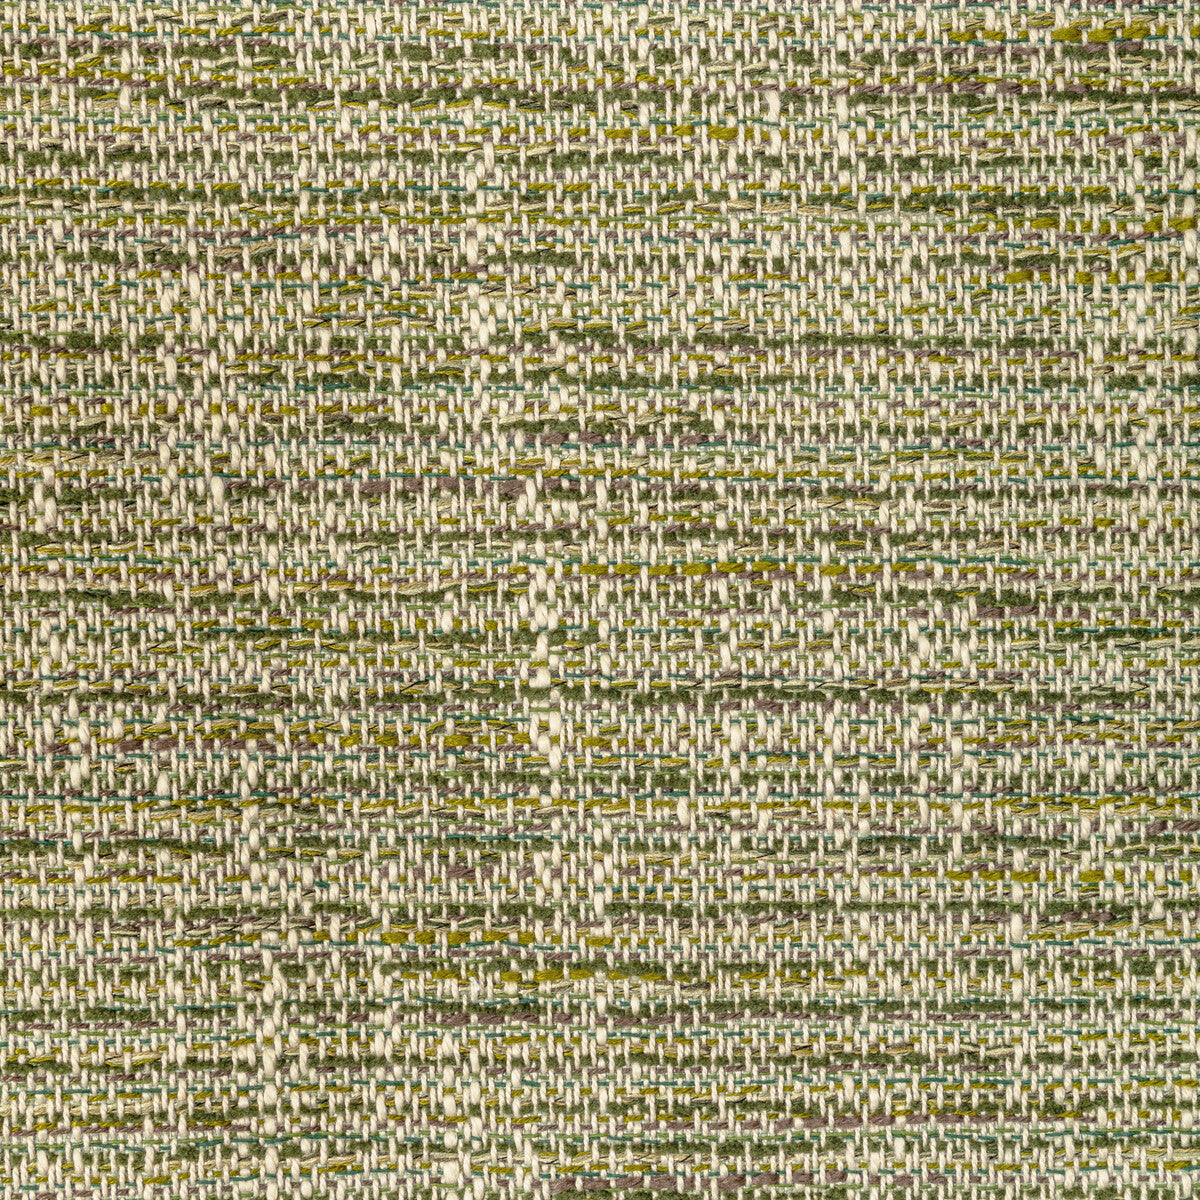 Kravet Design fabric in 36406-3 color - pattern 36406.3.0 - by Kravet Design in the Performance Crypton Home collection